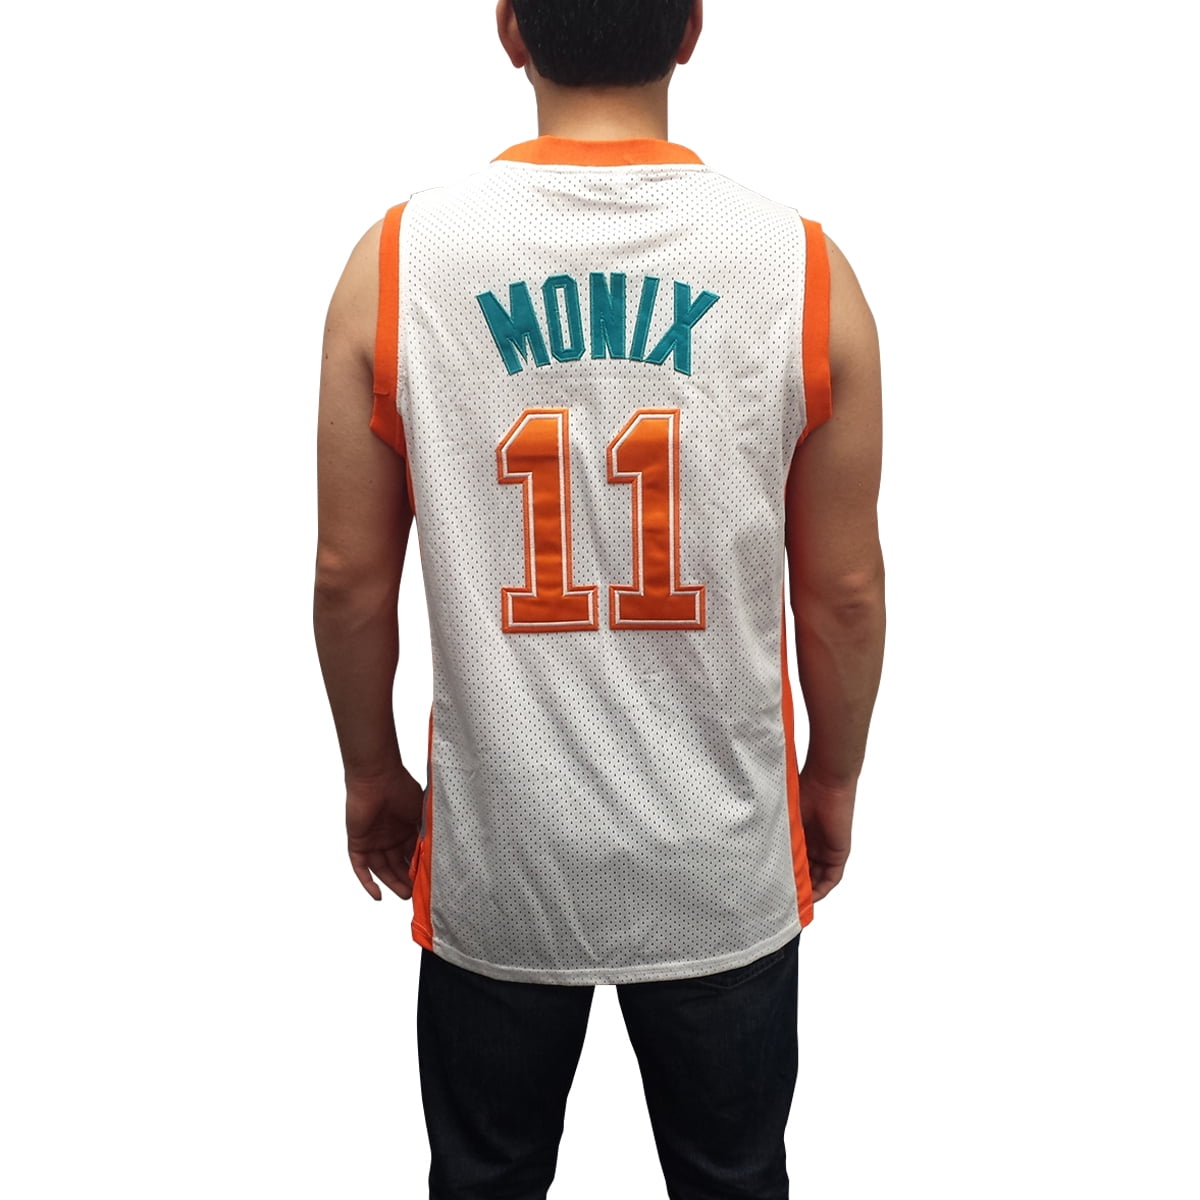 Basketball Jersey completes our Miami merch collection